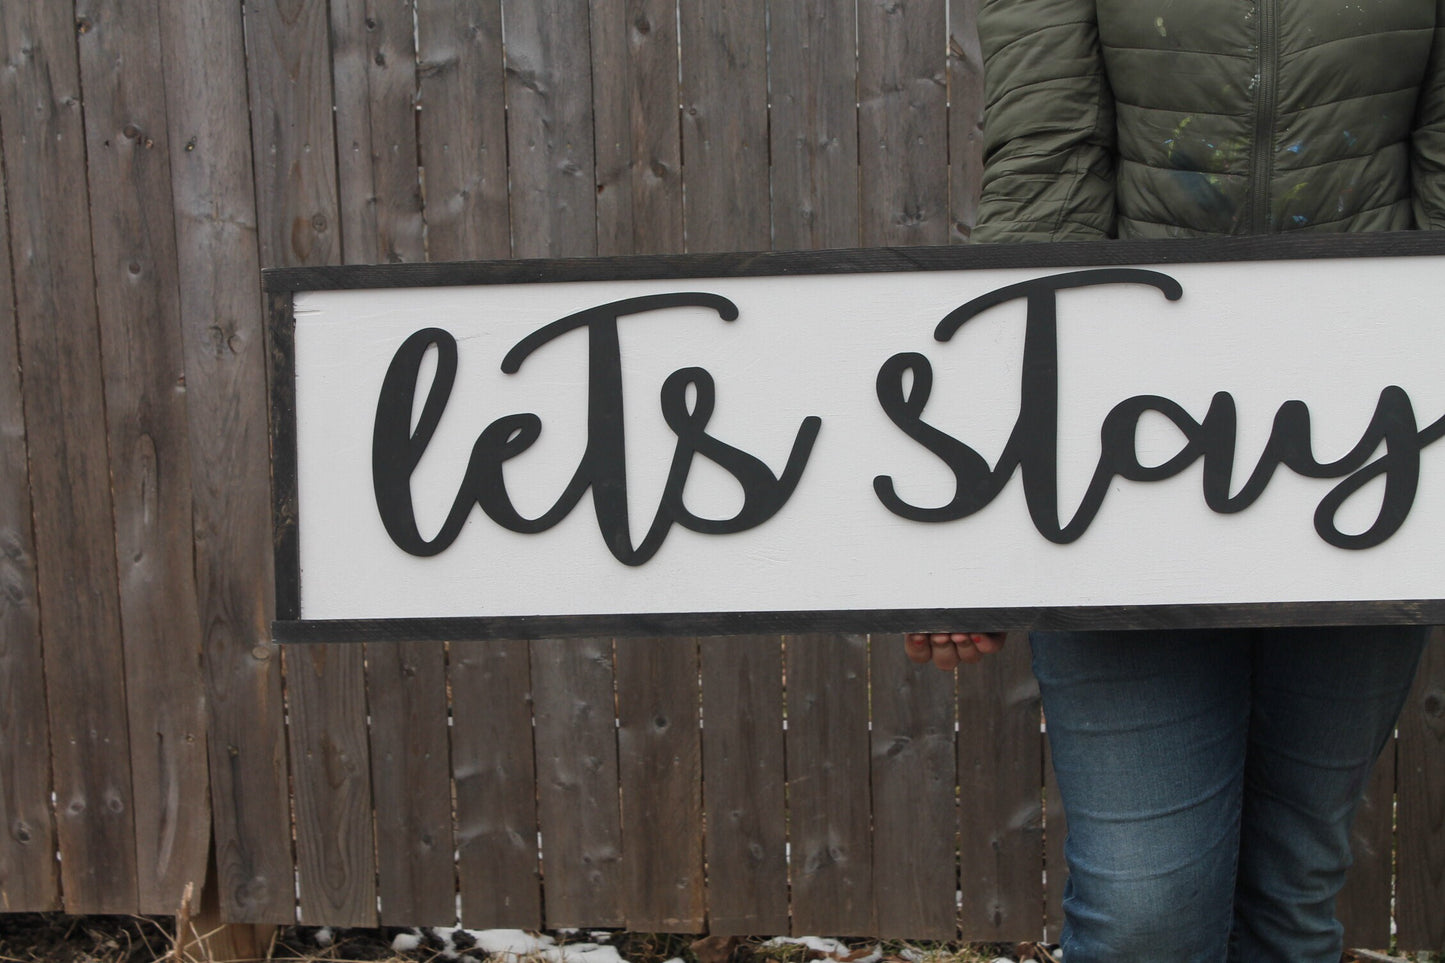 Lets Stay Home, Large family sign, wood, 3D, Raised Text, fireplace, living room, dining room, shabby cottage, chic, farmhouse, rustic decor